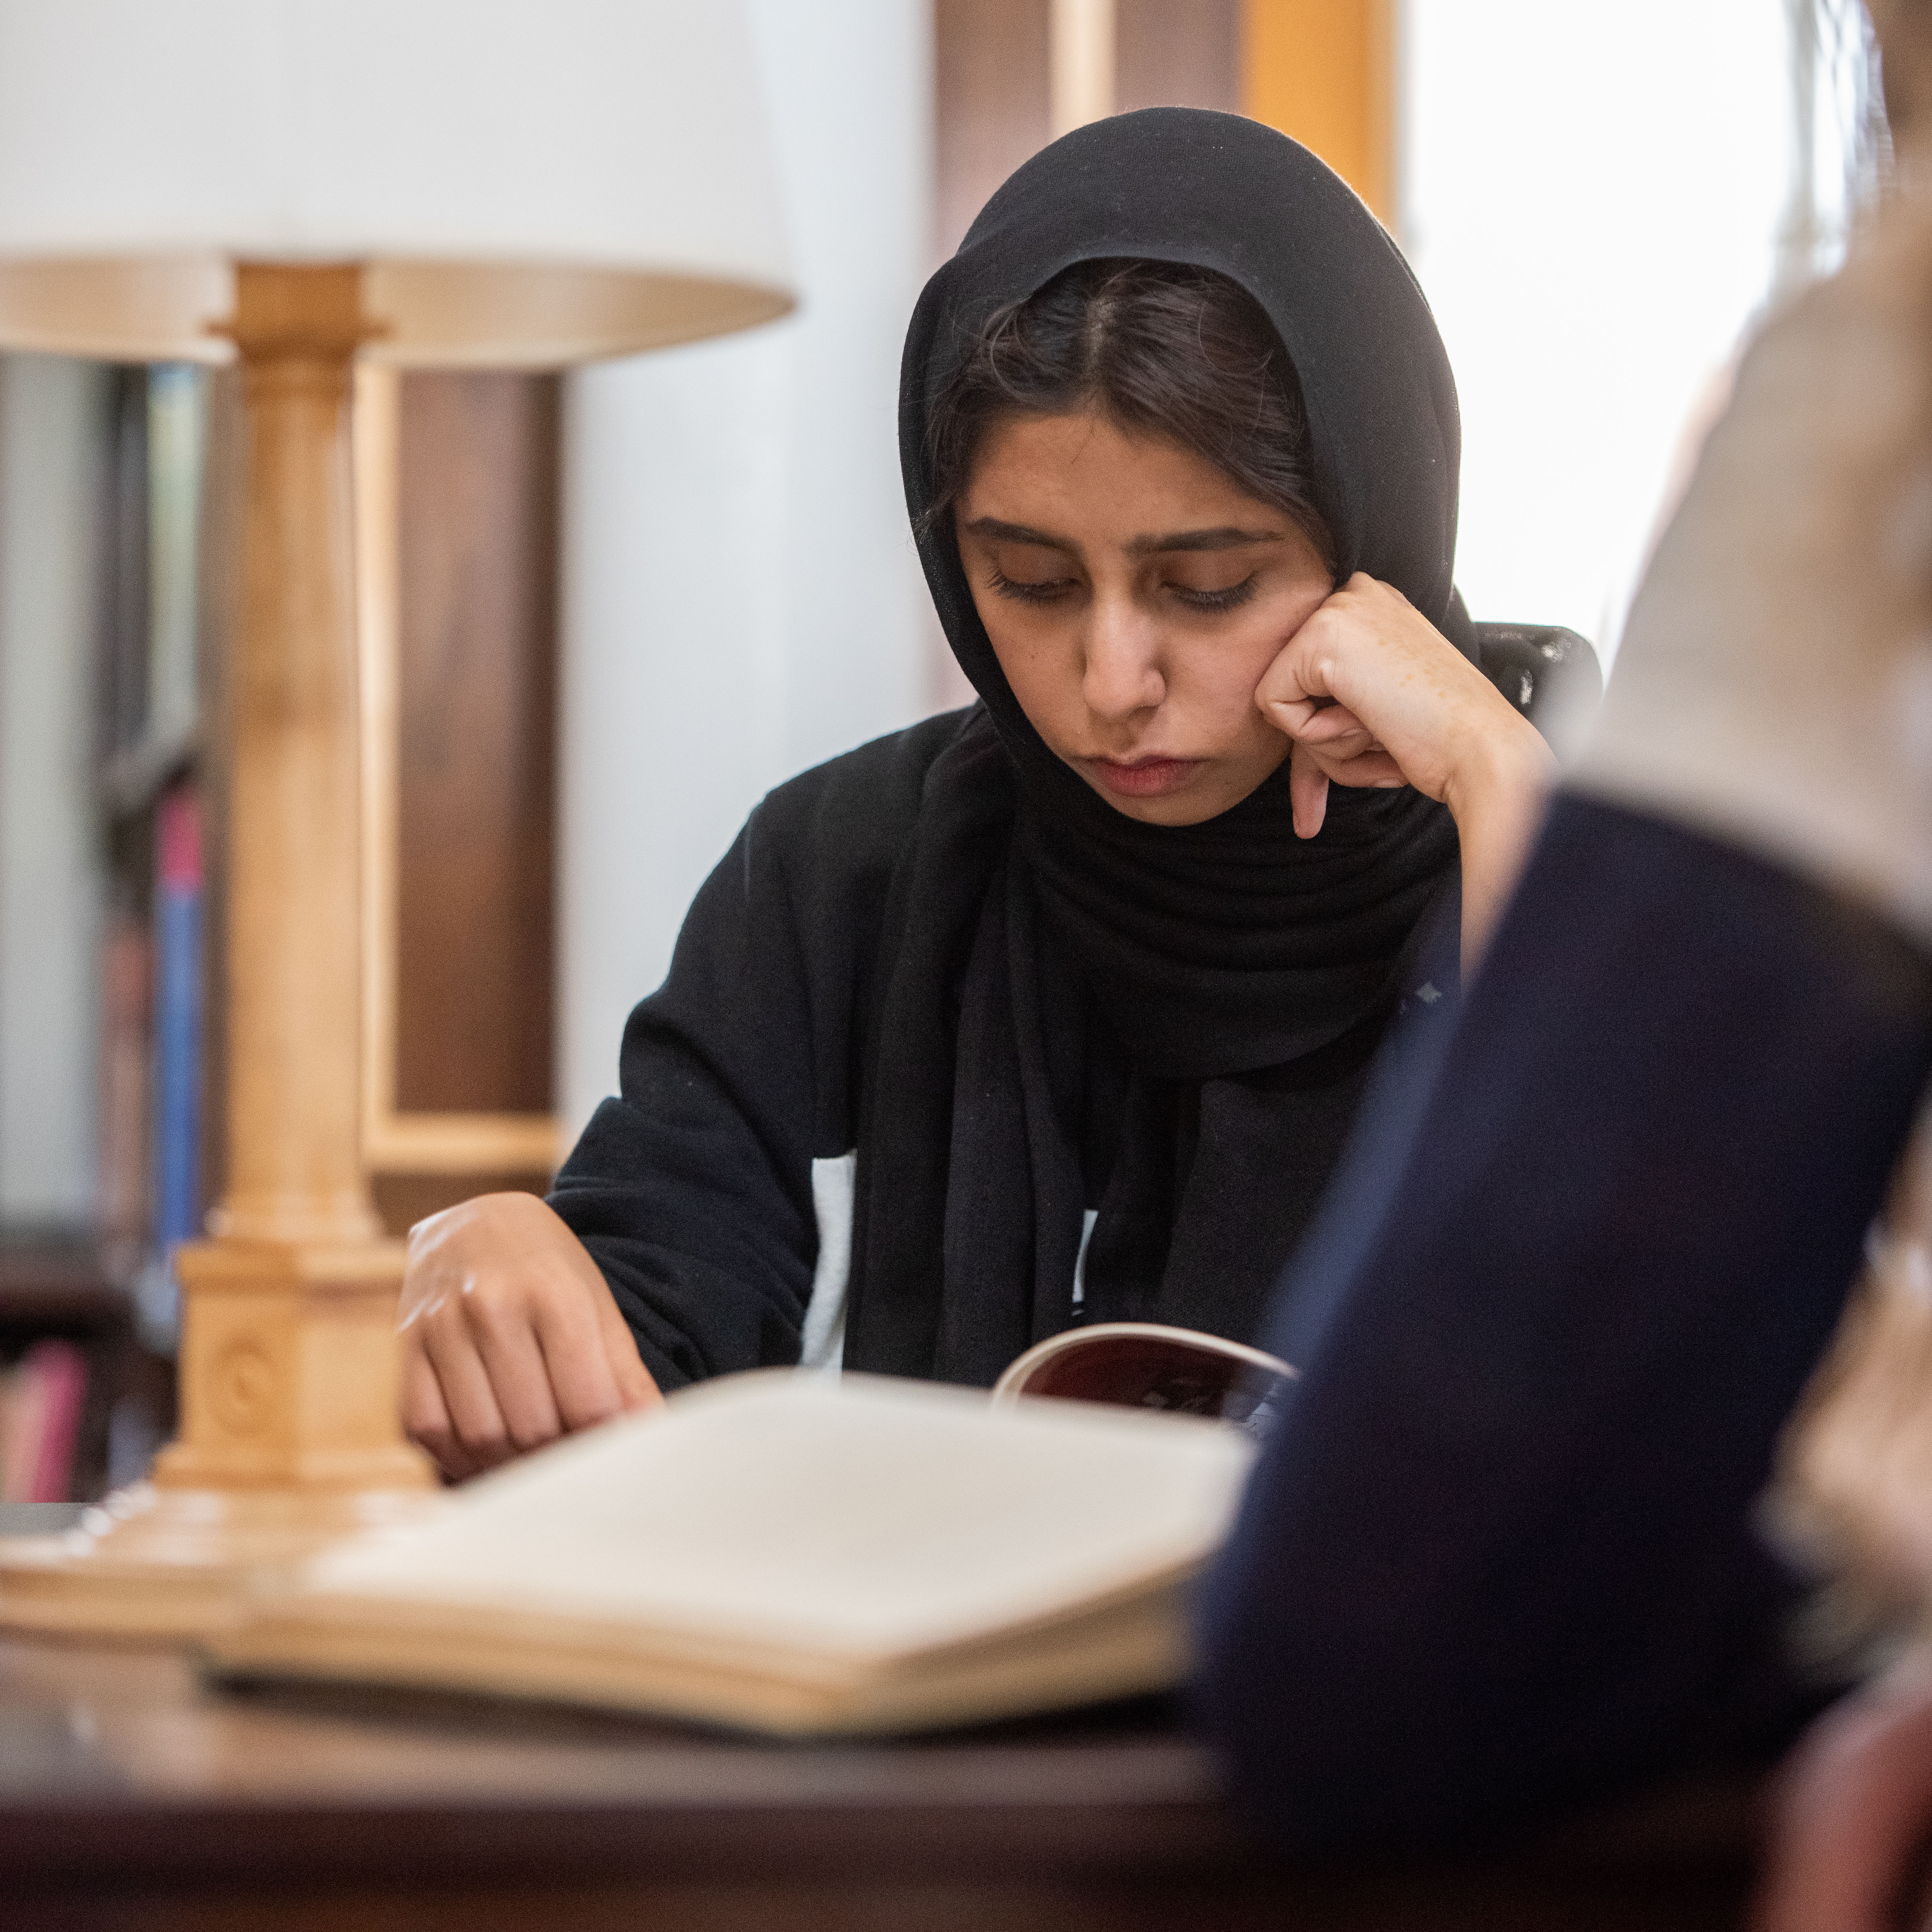 LMH student Maah-Noor studying in the Library